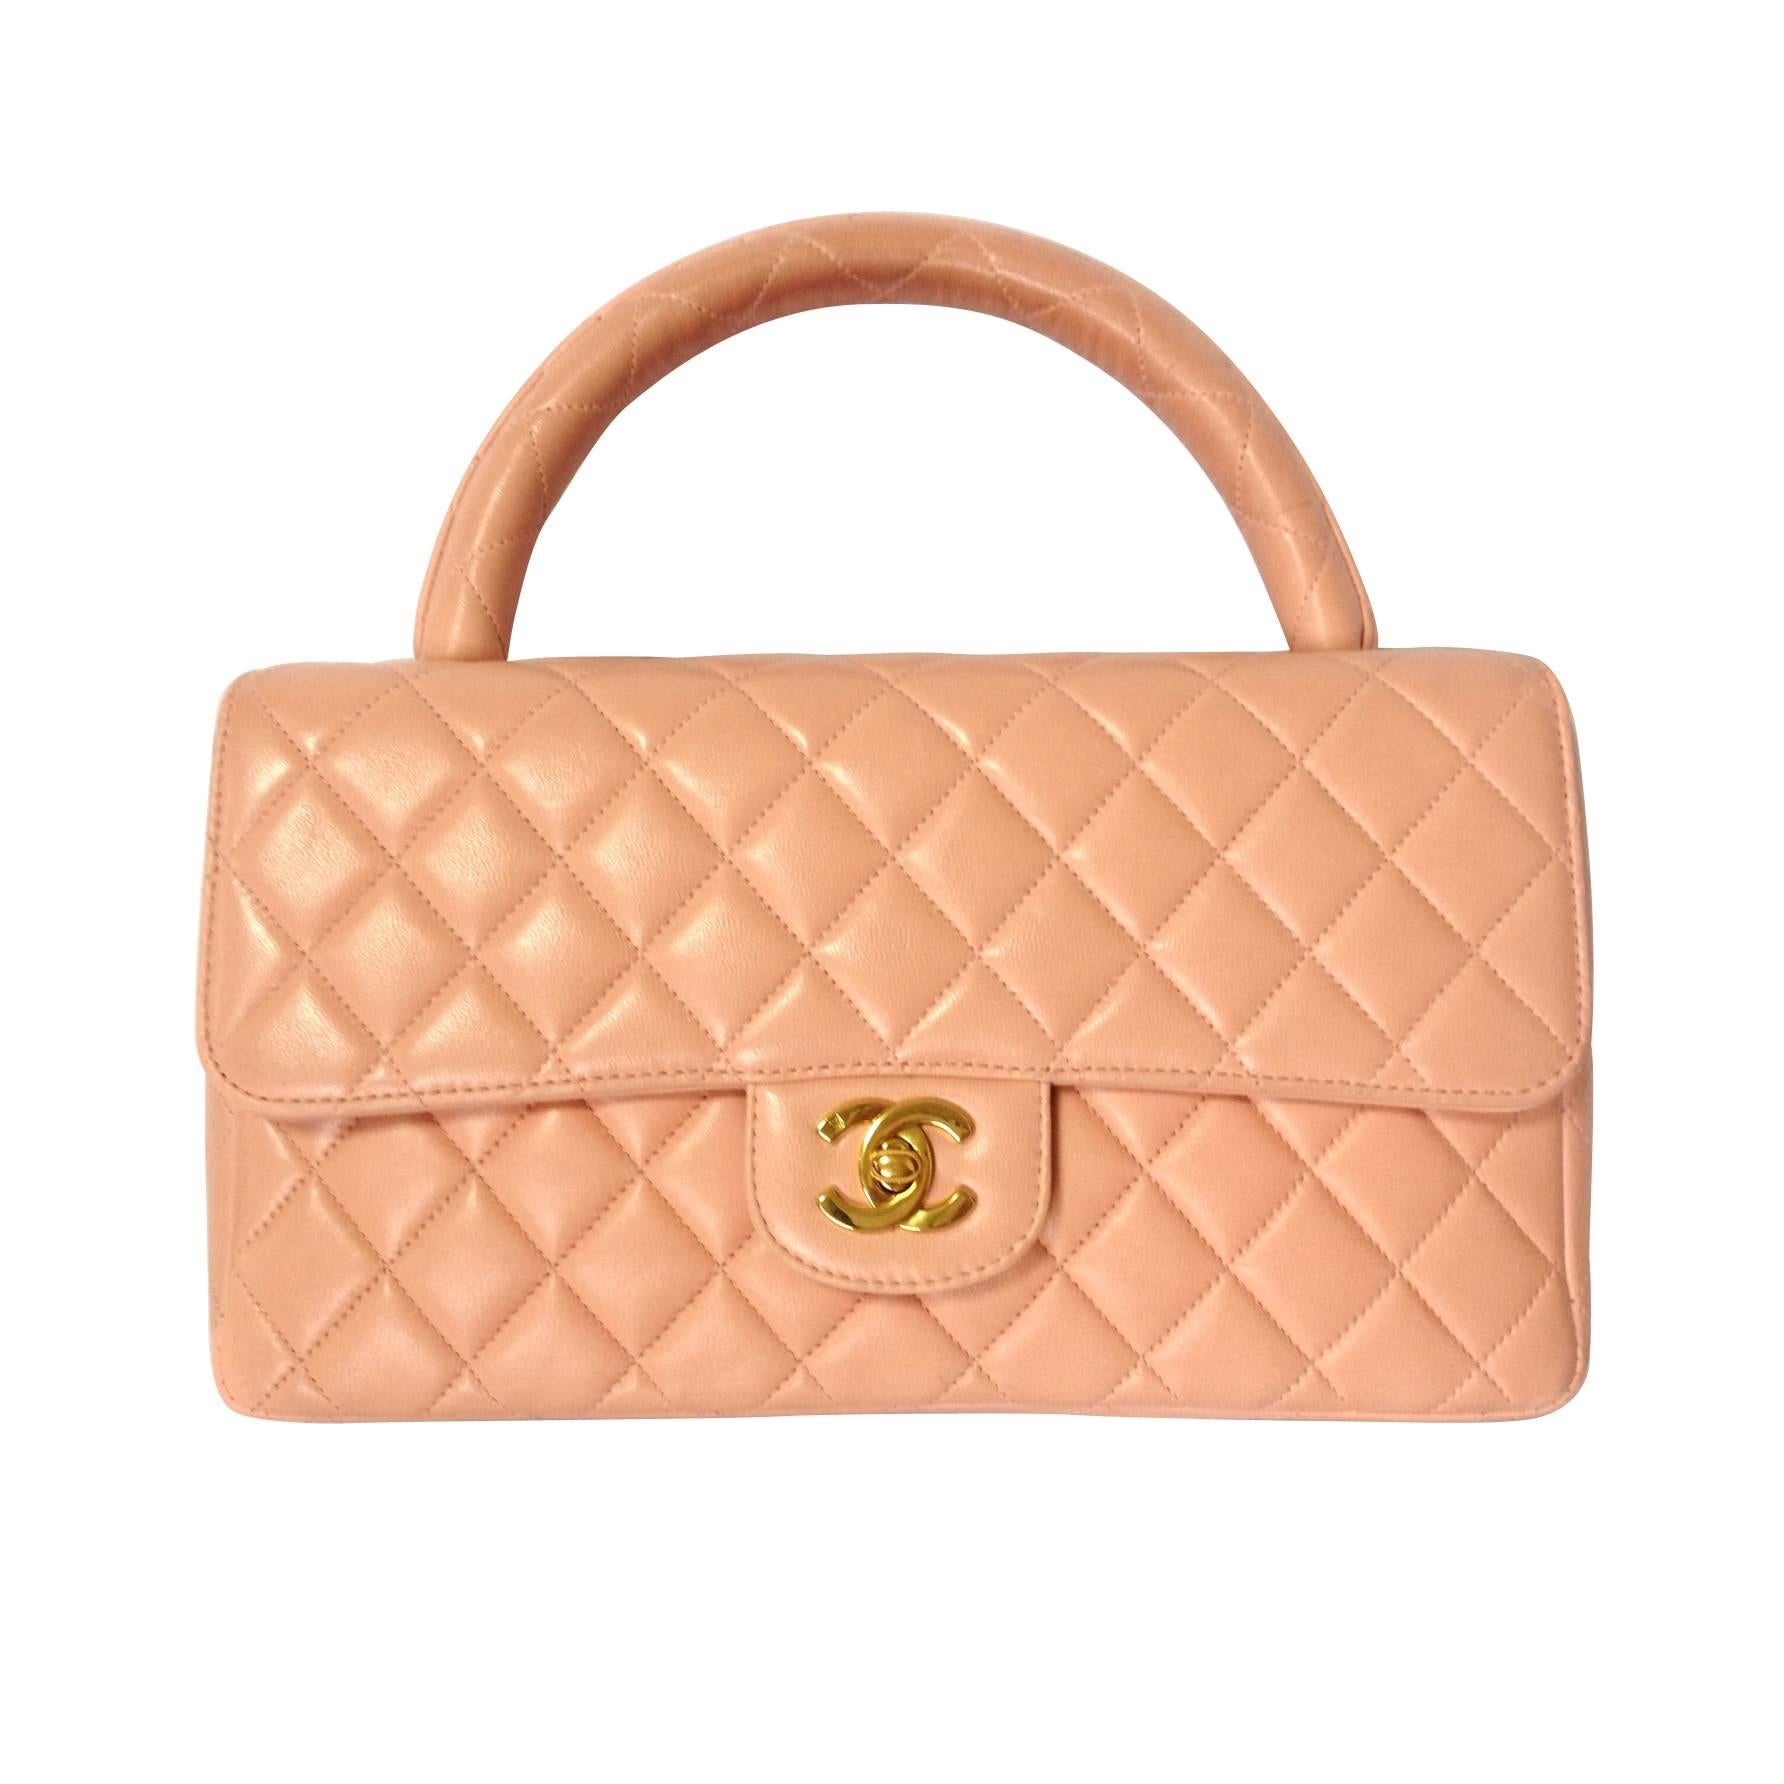 Vintage CHANEL milky pink color lambskin classic 2.55 handbag purse with gold CC For Sale